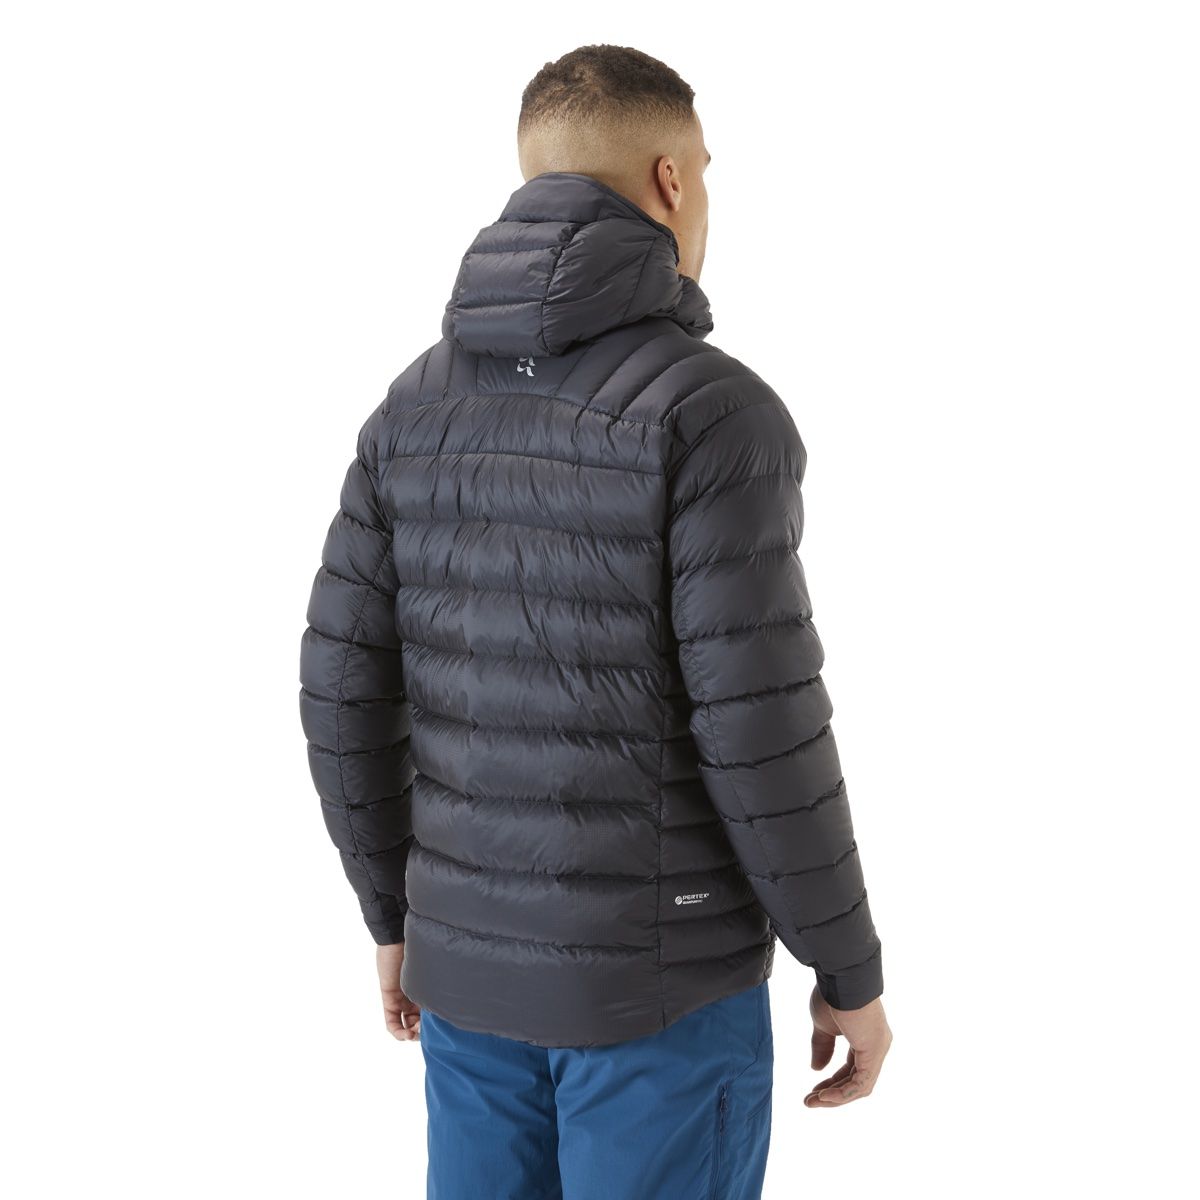 Rab Electron Pro Insulated Men's Jacket | Anthracite